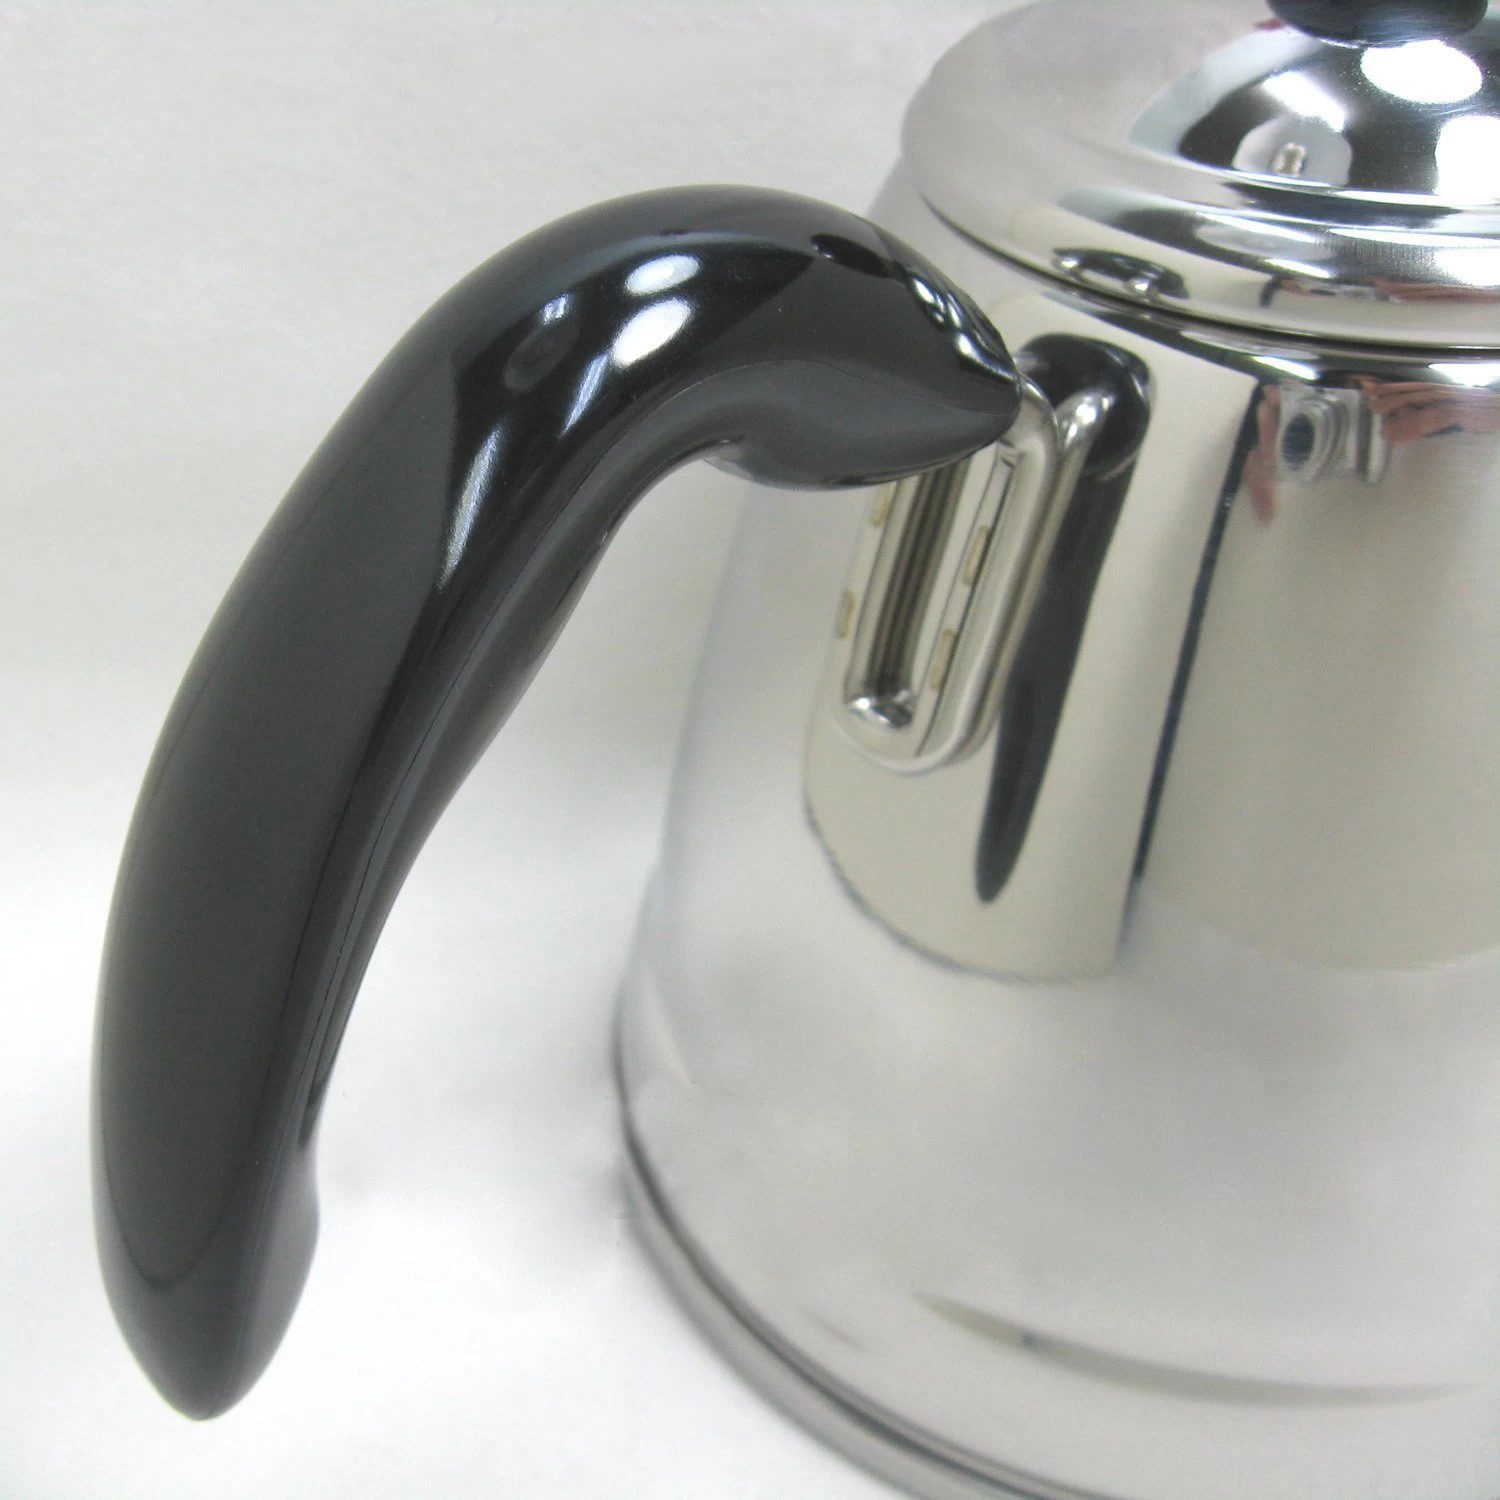 Reliable Quality Stainless Steel Tea Coffee Kettle Gooseneck Thin Spout for Pour Over Coffee